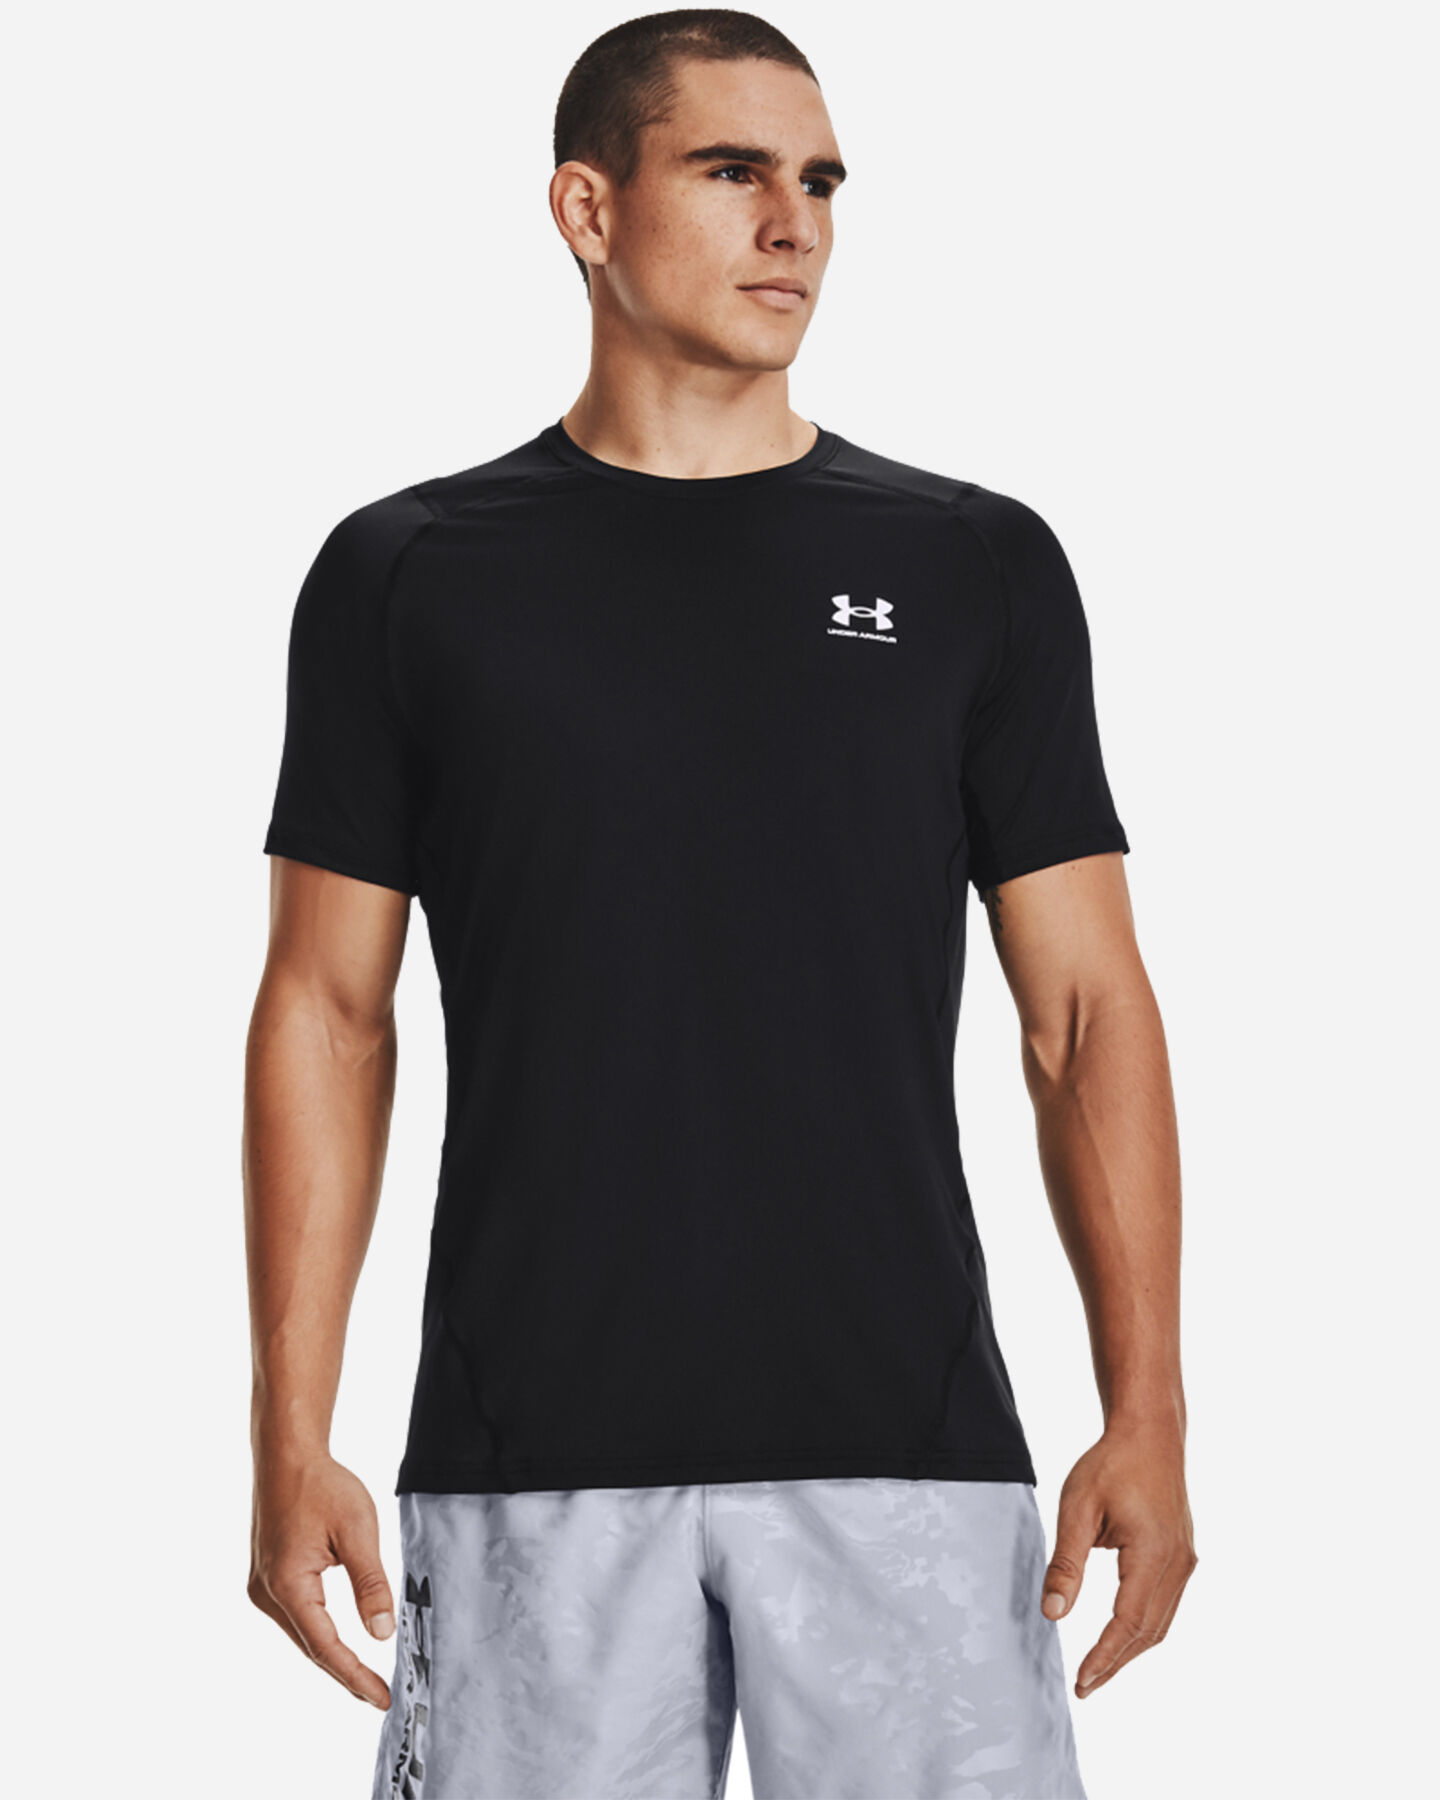  T-Shirt training UNDER ARMOUR HEAT GEAR M S5287412|0001|SM scatto 2